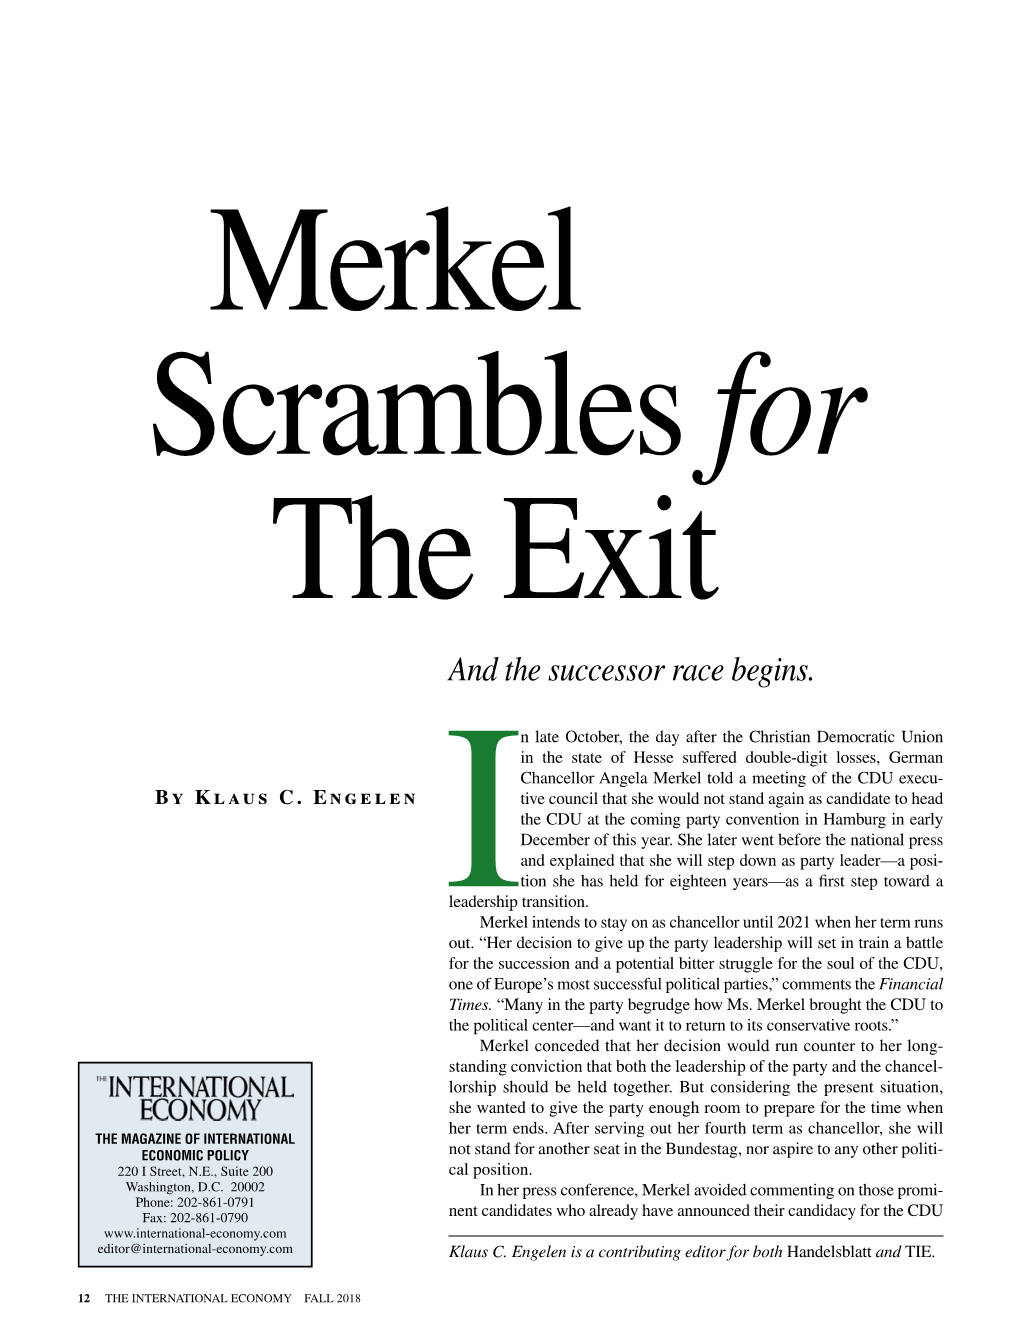 Merkel Scrambles for the Exit and the Successor Race Begins